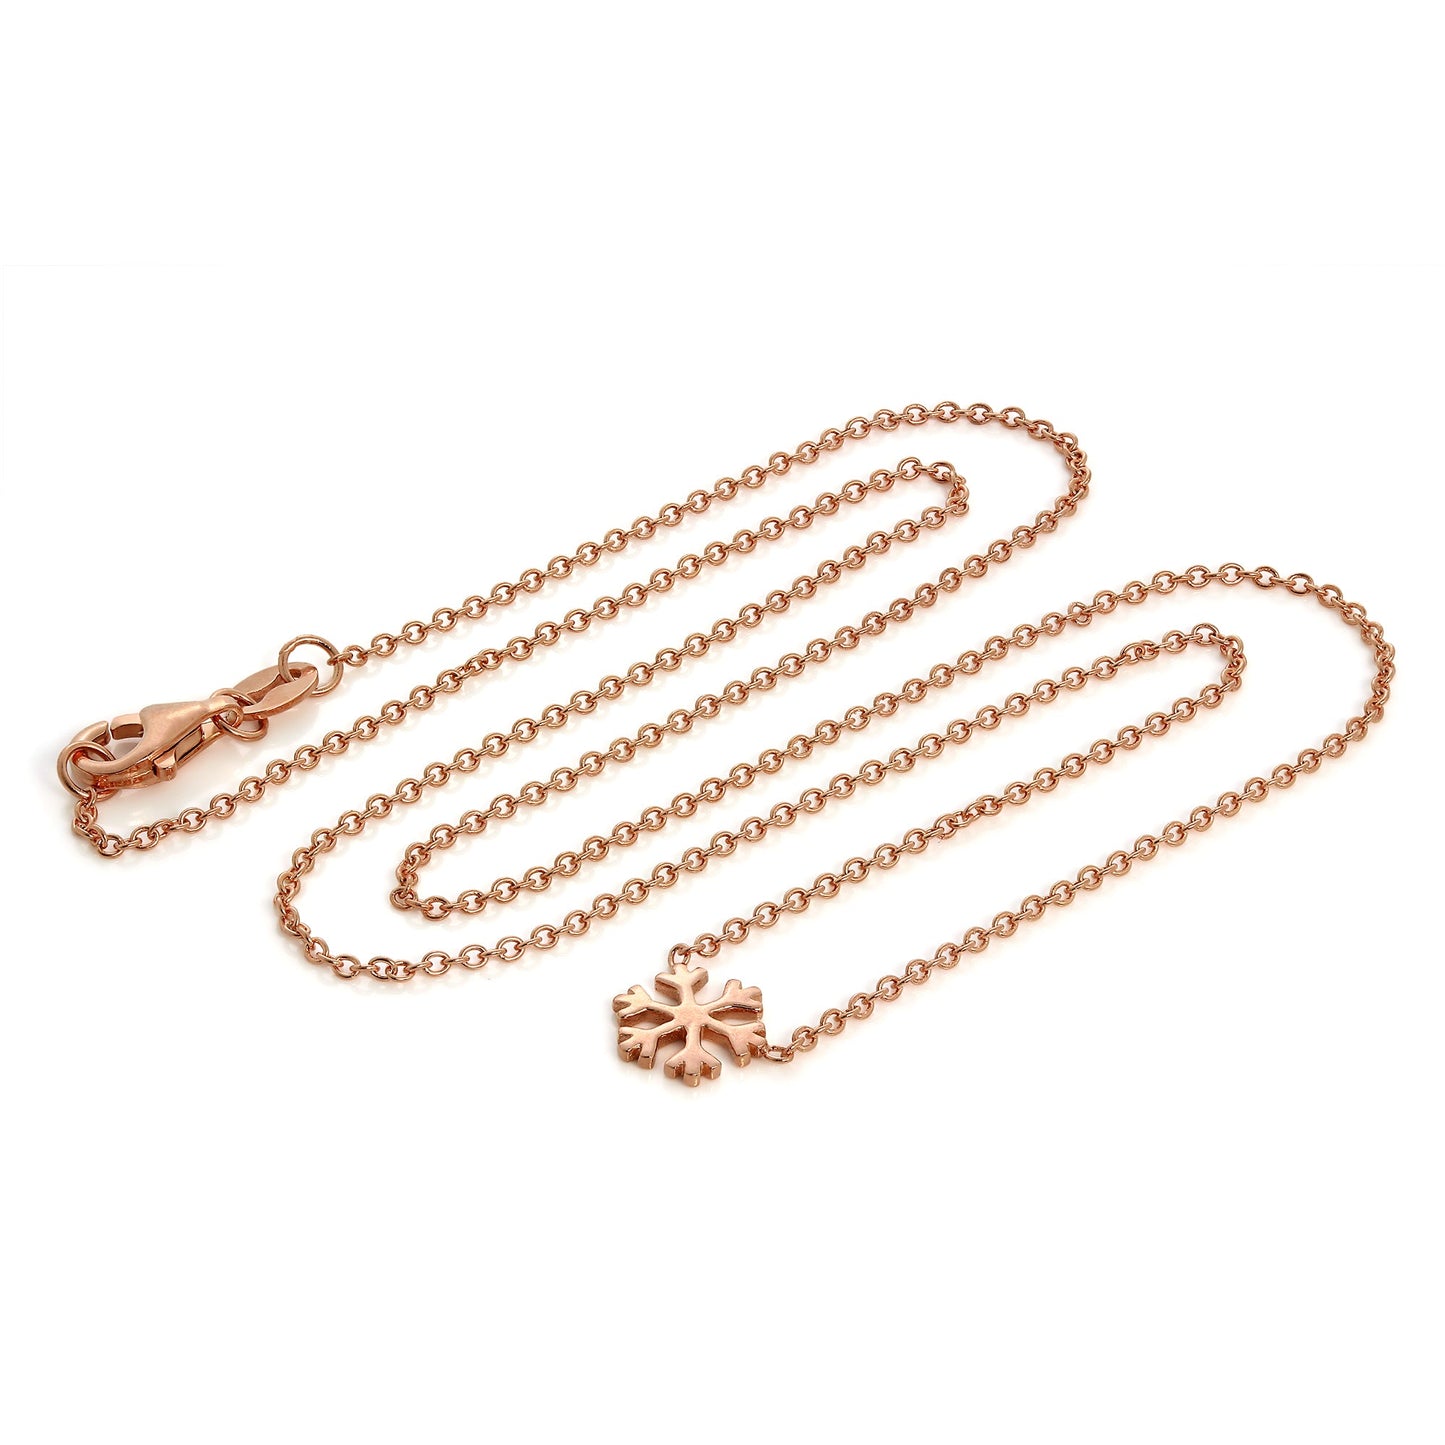 Rose Gold Plated Sterling Silver 18 Inch Snowflake Necklace